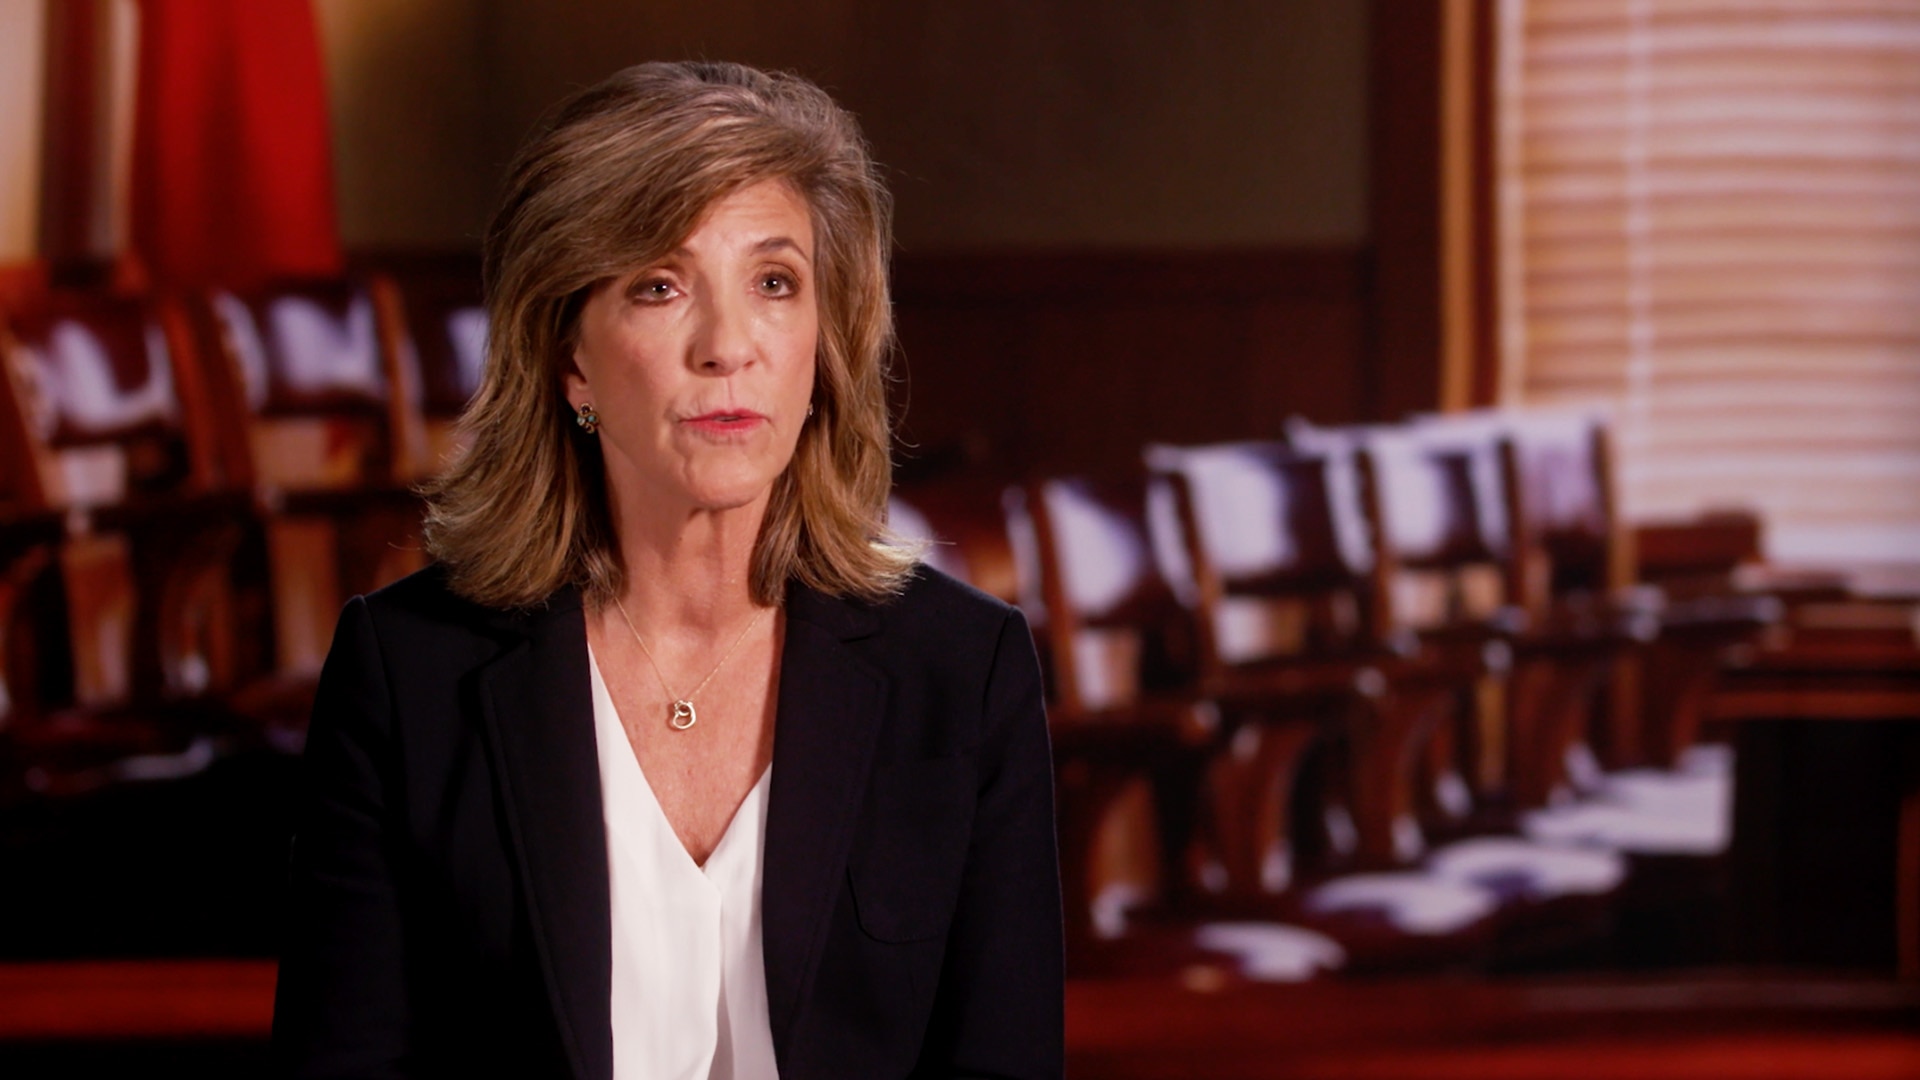 Kelly Siegler and Cold Justice Team Break Down How They Approach Cases in CrimeCon Event